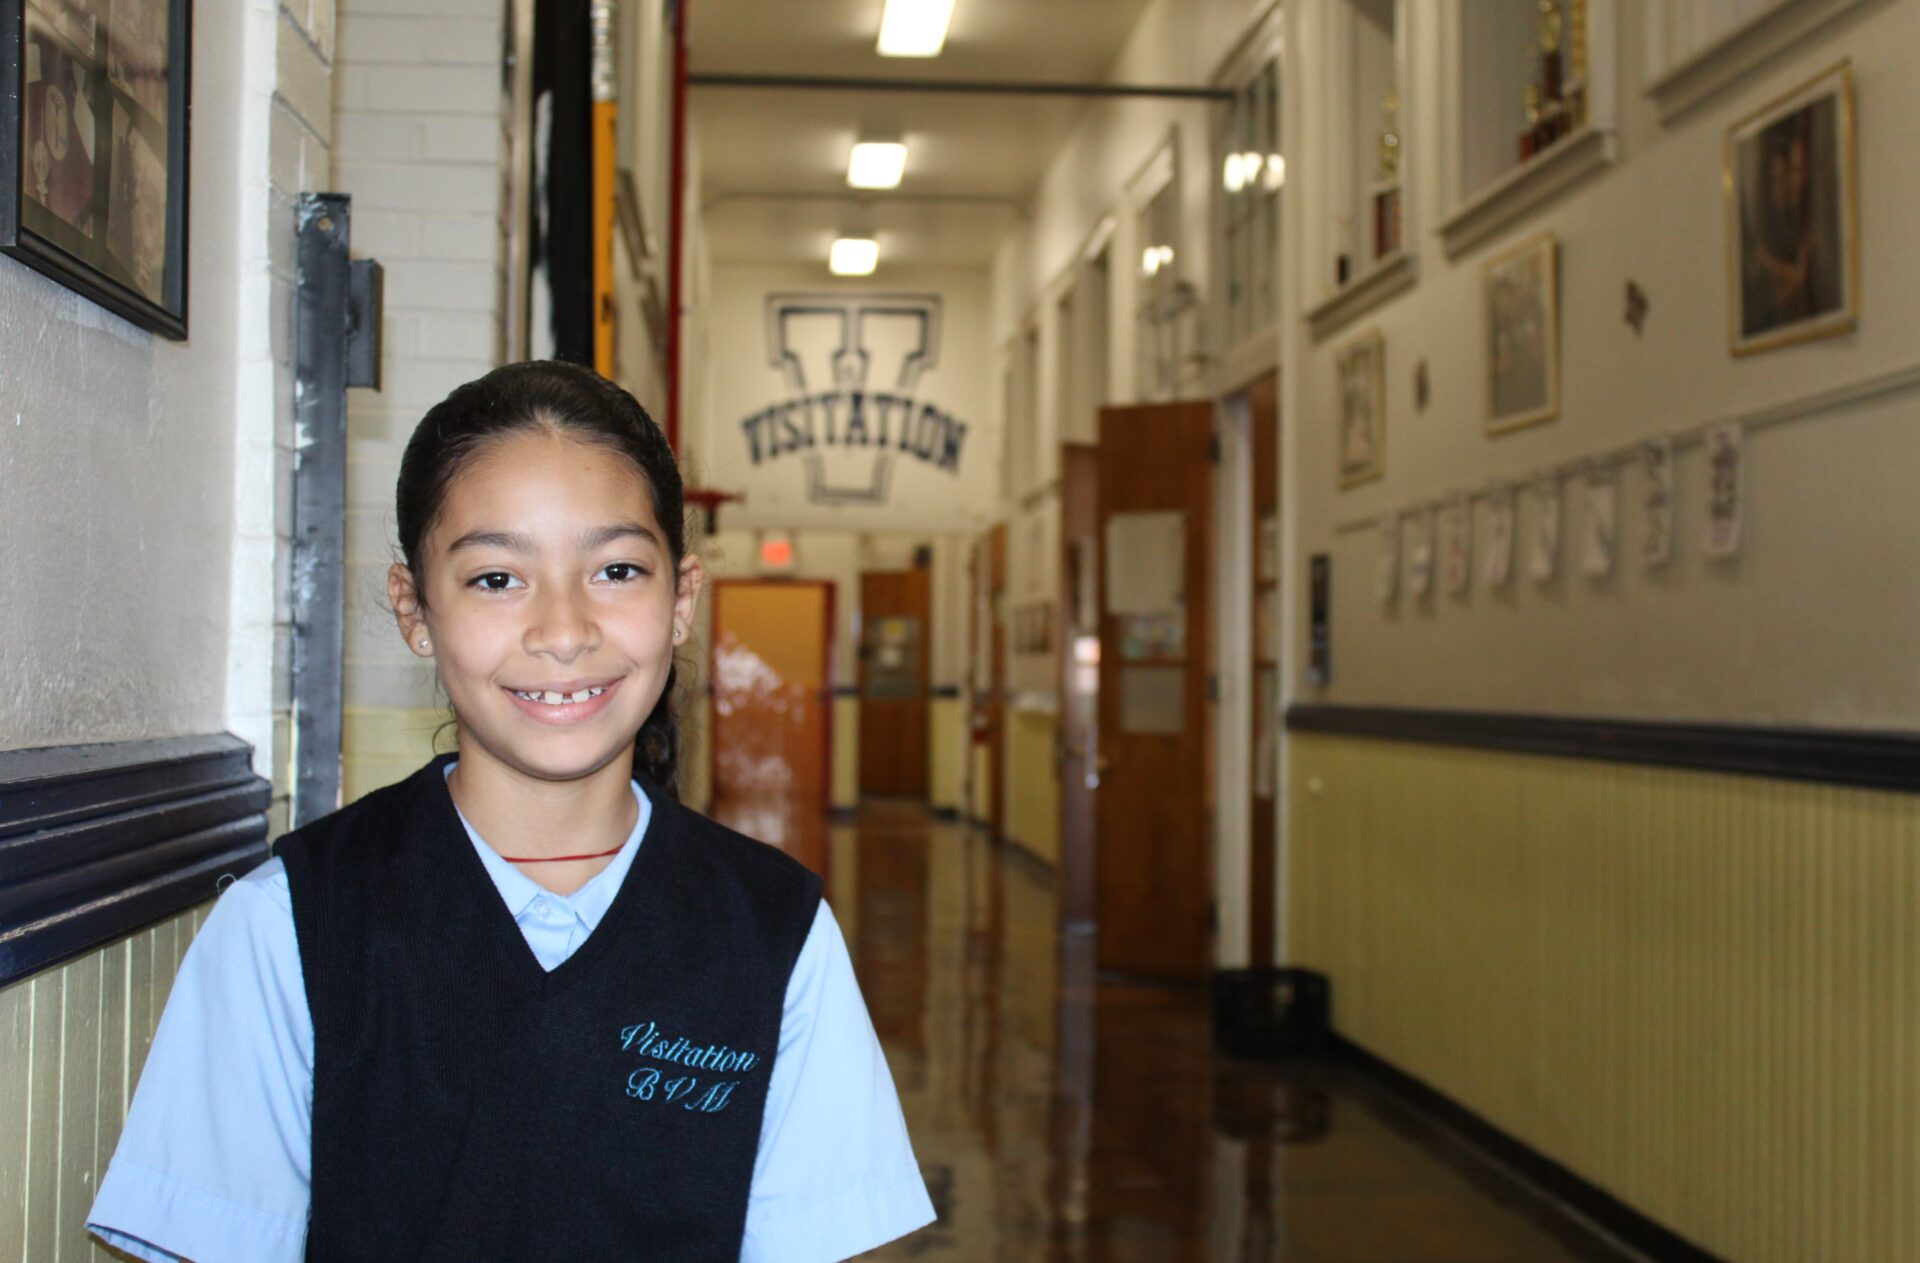 Student smiles while standing in the hallway